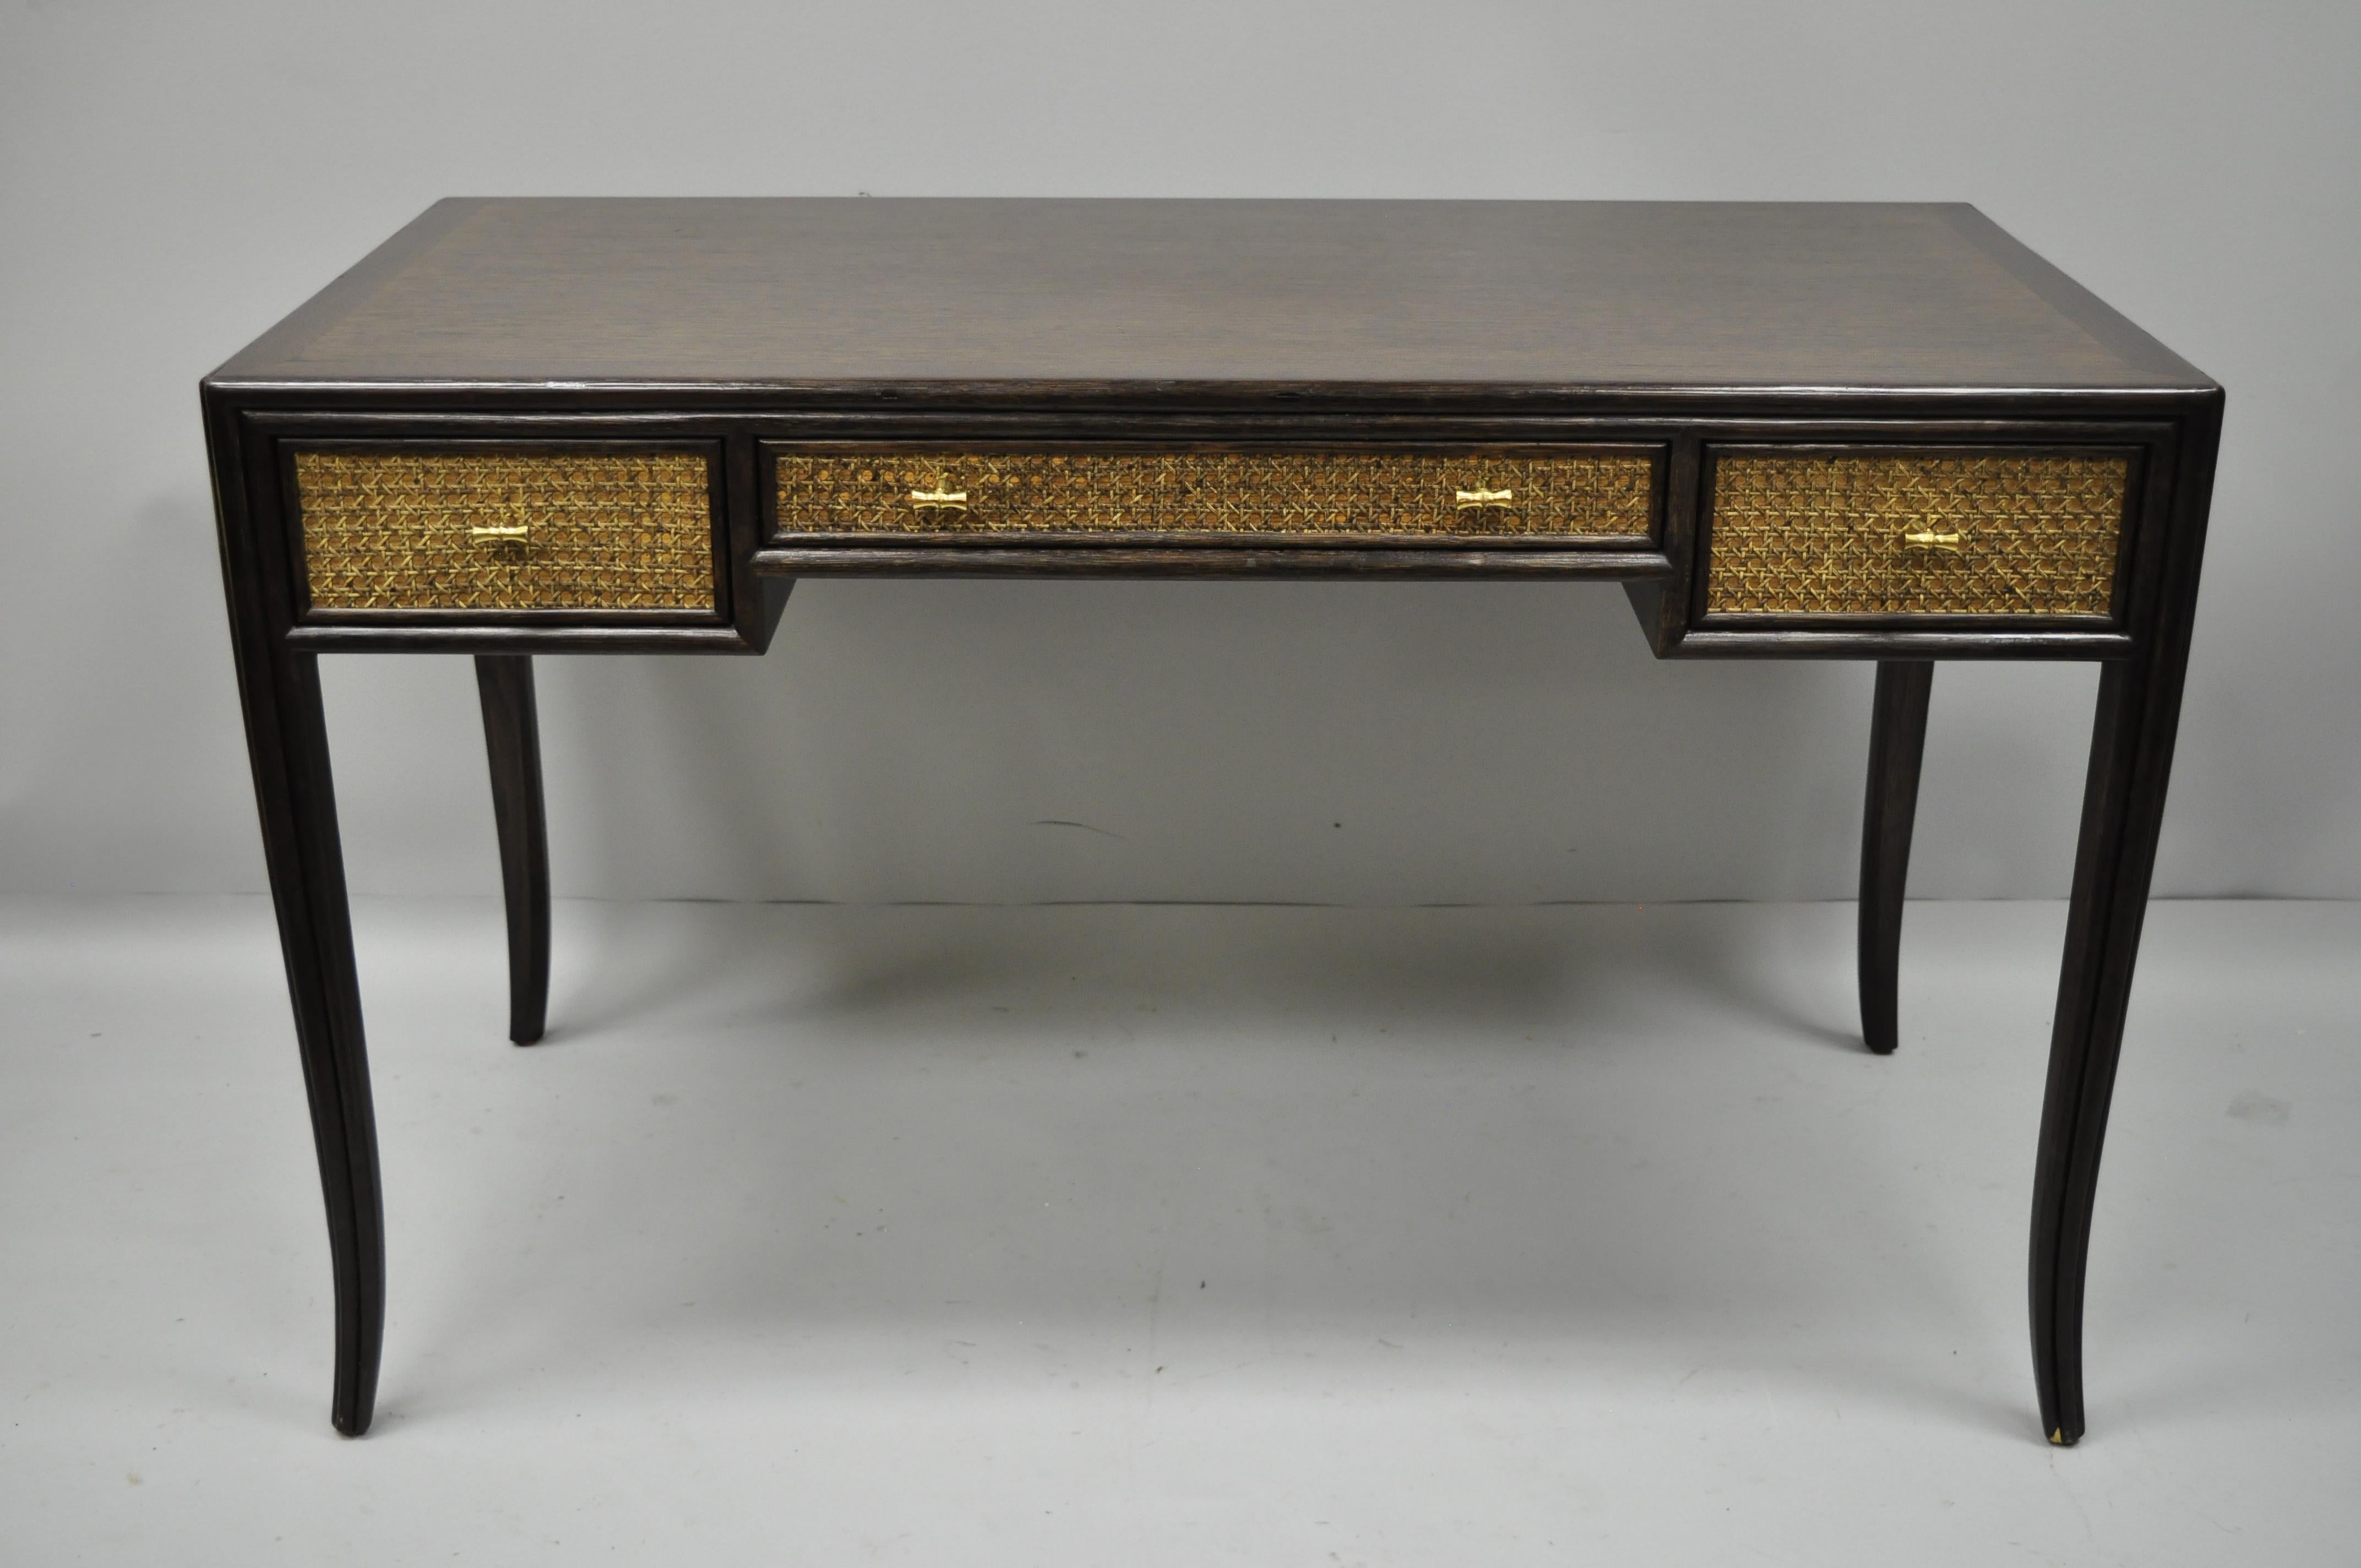 Barbara Barry for McGuire oak and cane desk. Item features solid combed oakwood frame, cane fronts, sides and finished back, tapered legs, solid brass faux bamboo drawer pulls, original label, three drawers, and quality American craftsmanship, circa